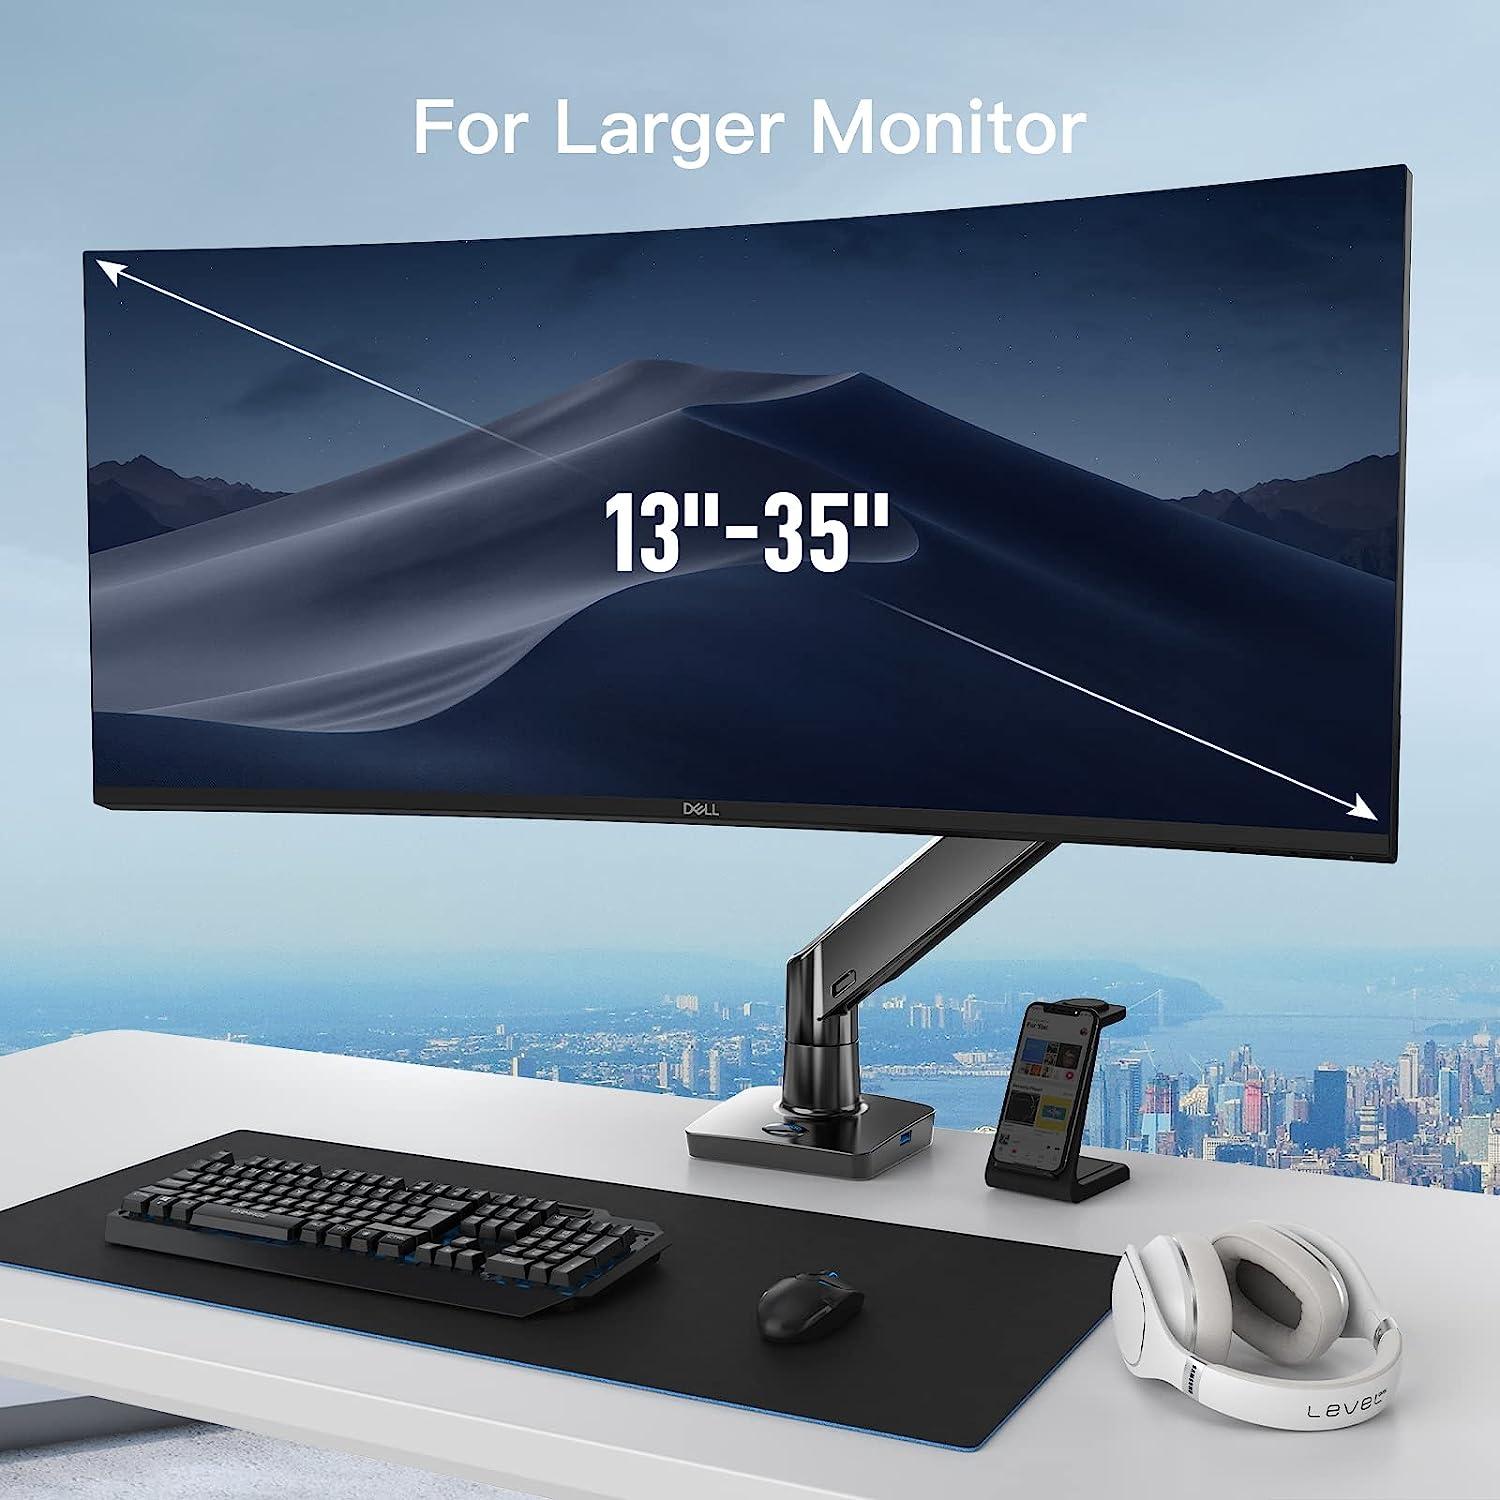 Single Monitor Mount Stand for $38.69 Shipped